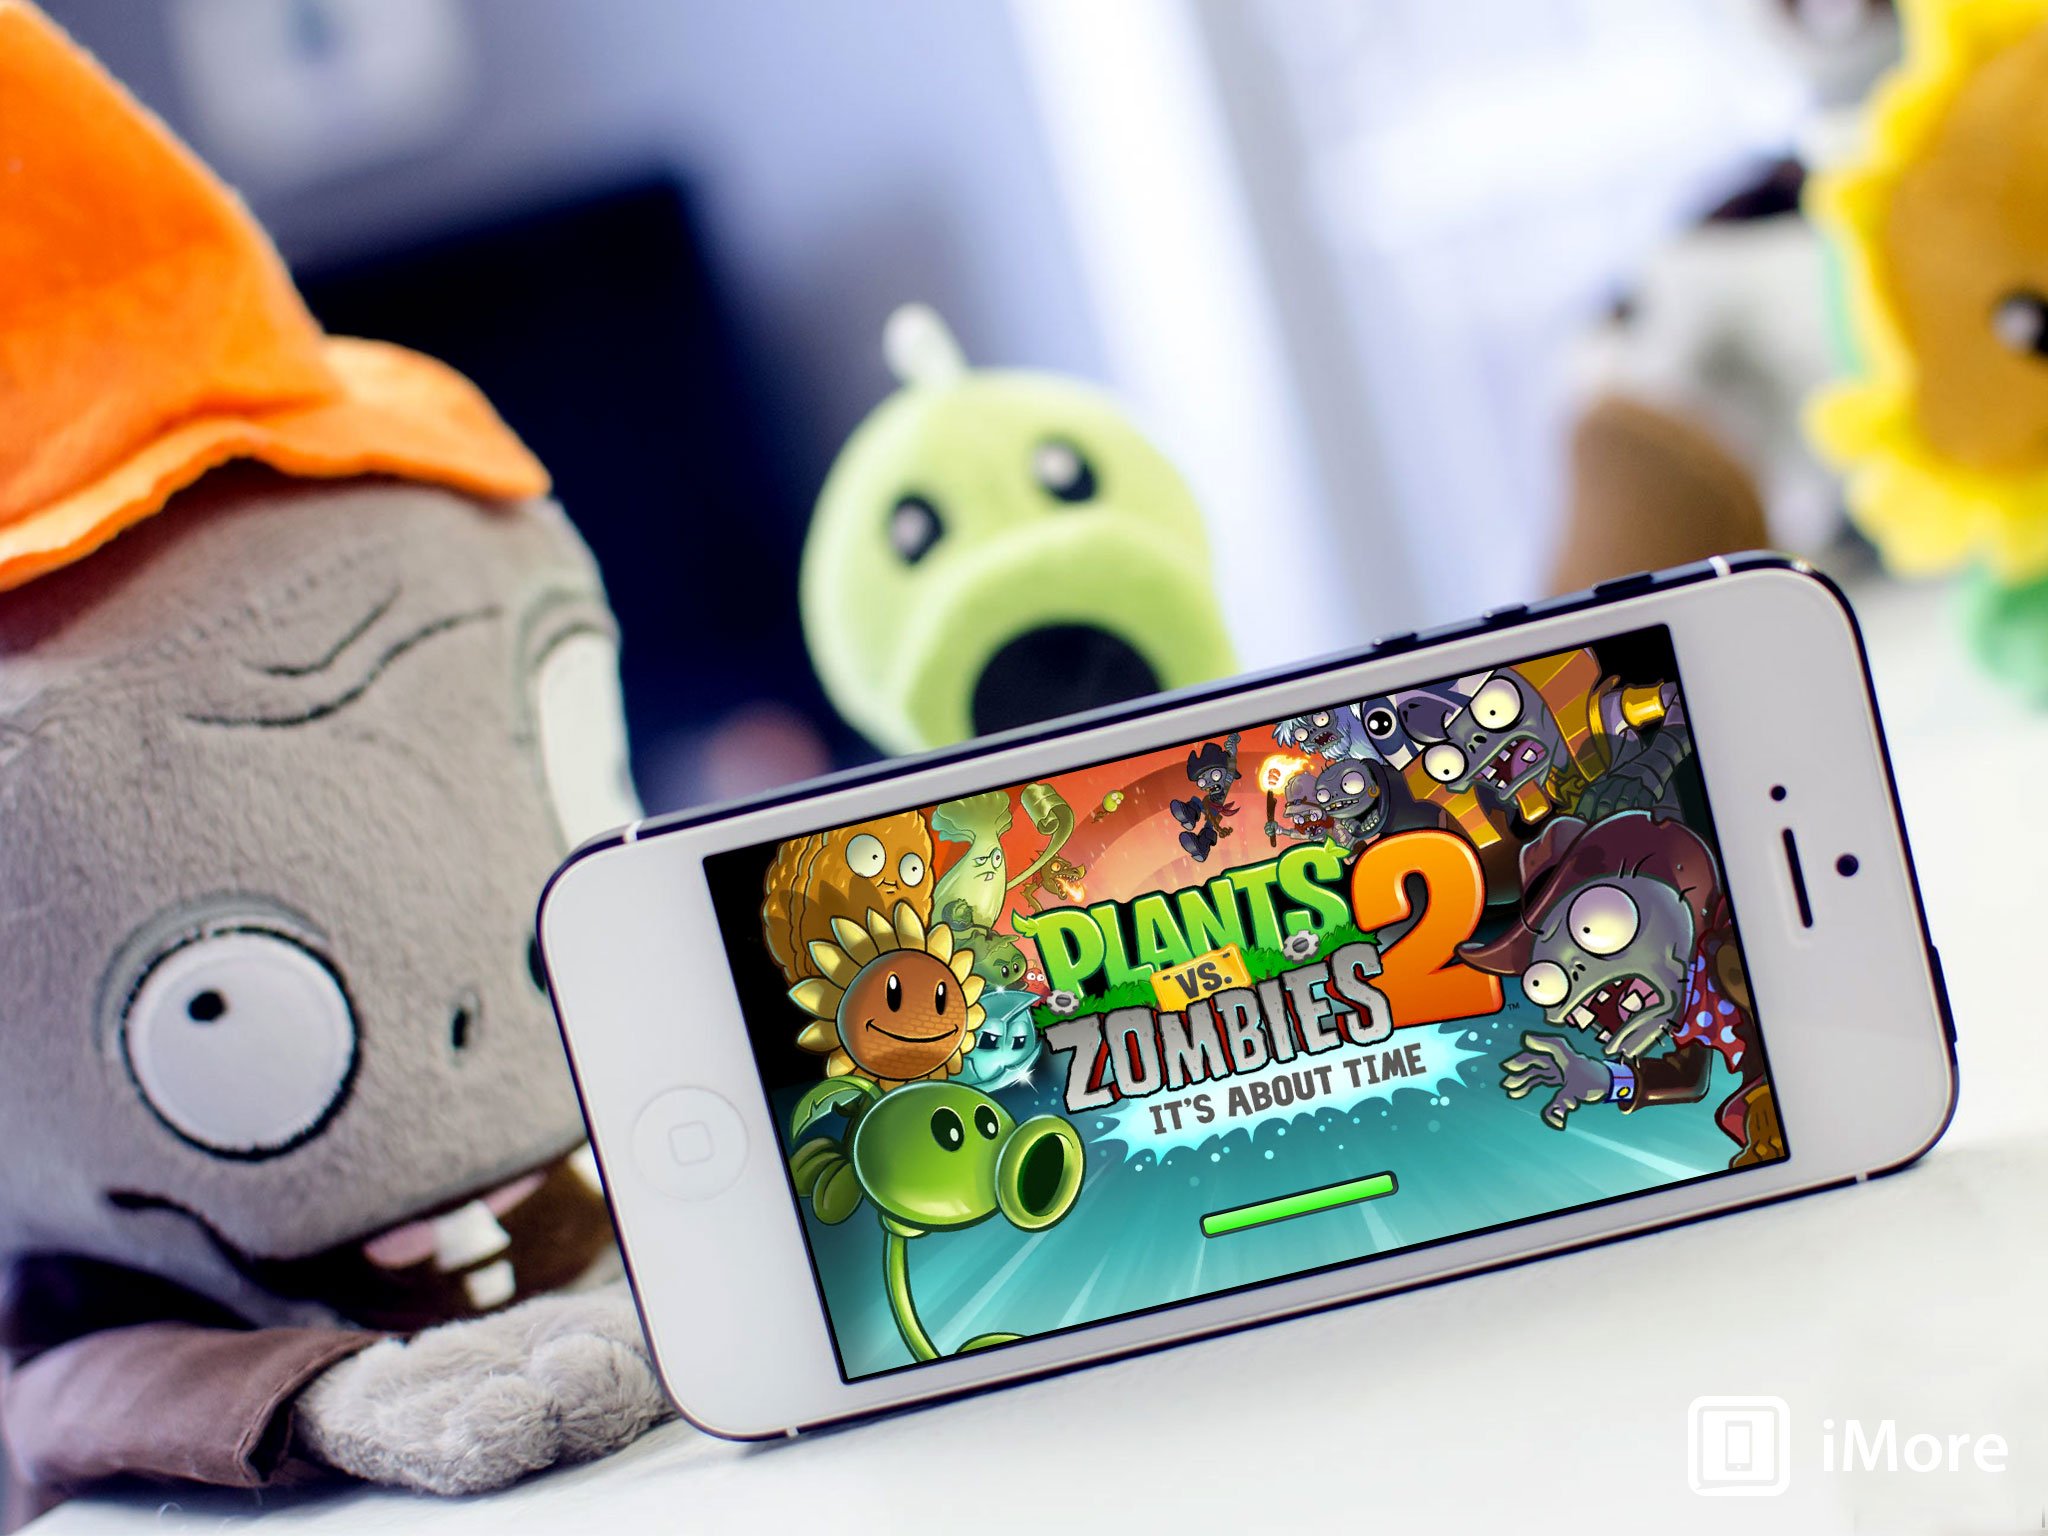 Plants vs. Zombies 2 preview: More plants, more zombies, more fun, some freemium crap